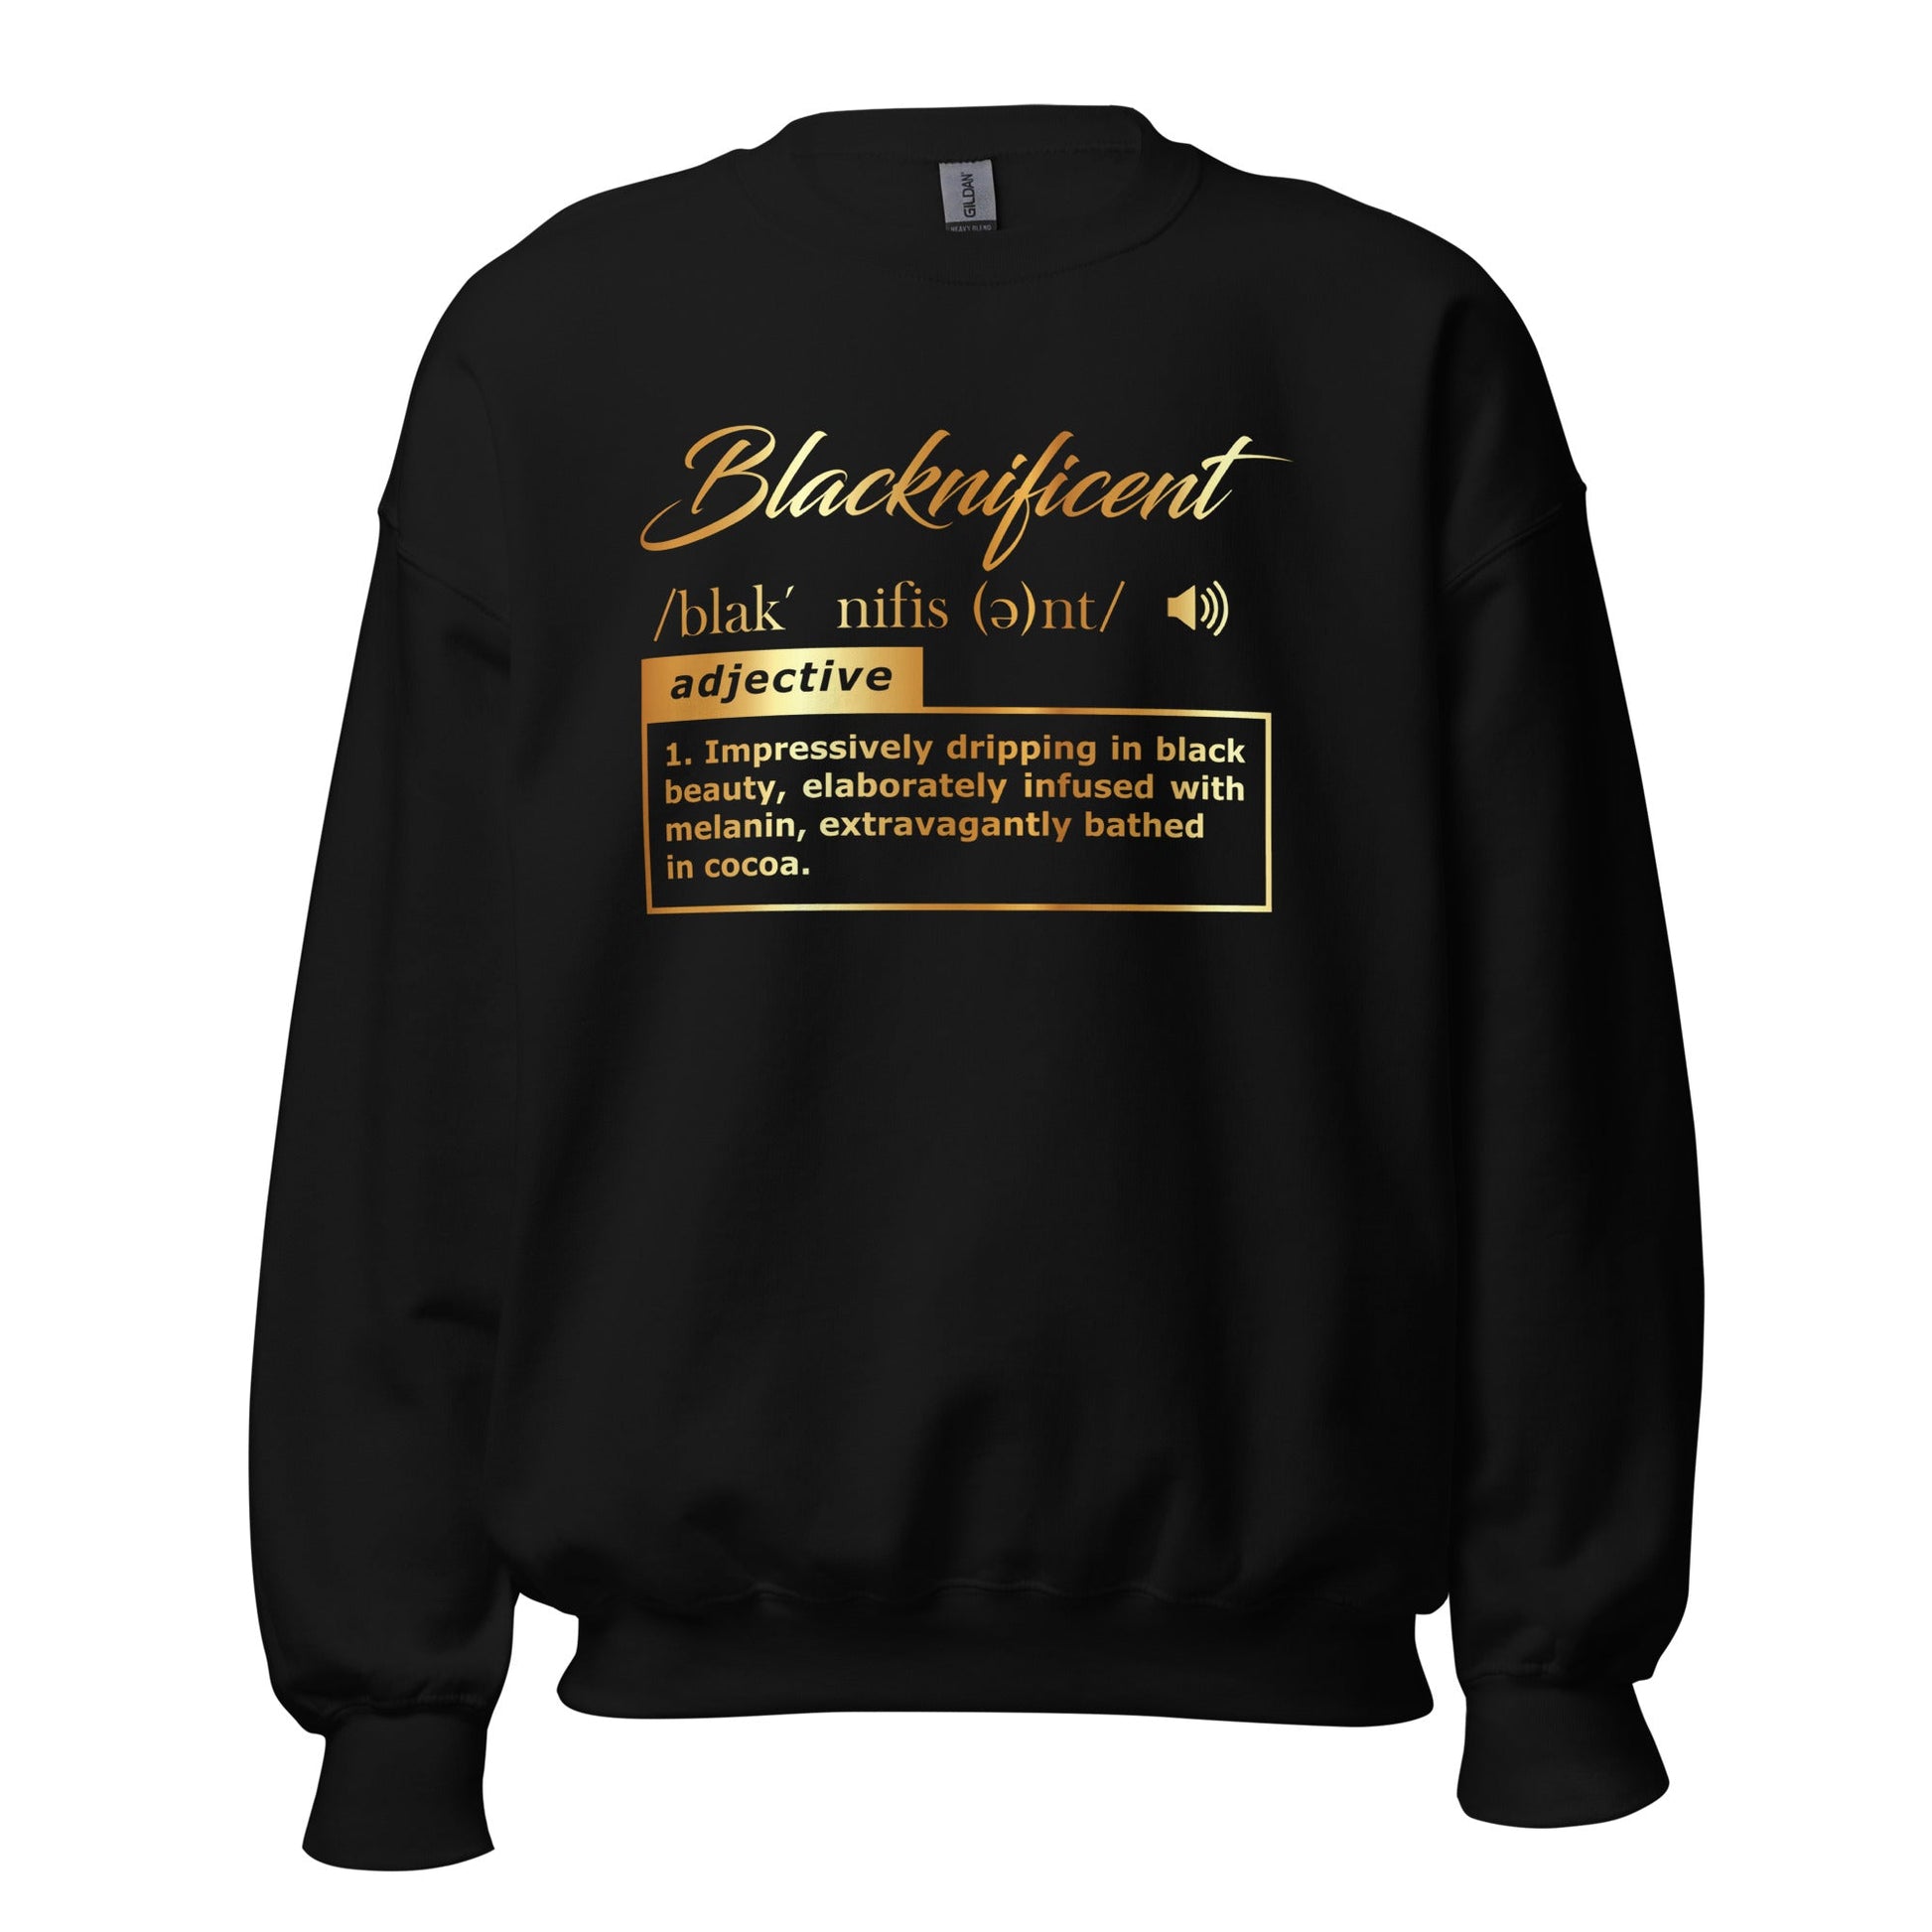 Blacknificent Short-Sleeve Unisex Sweater (For a Slim Fit Order a Size Down) - Catch This Tea Shirts